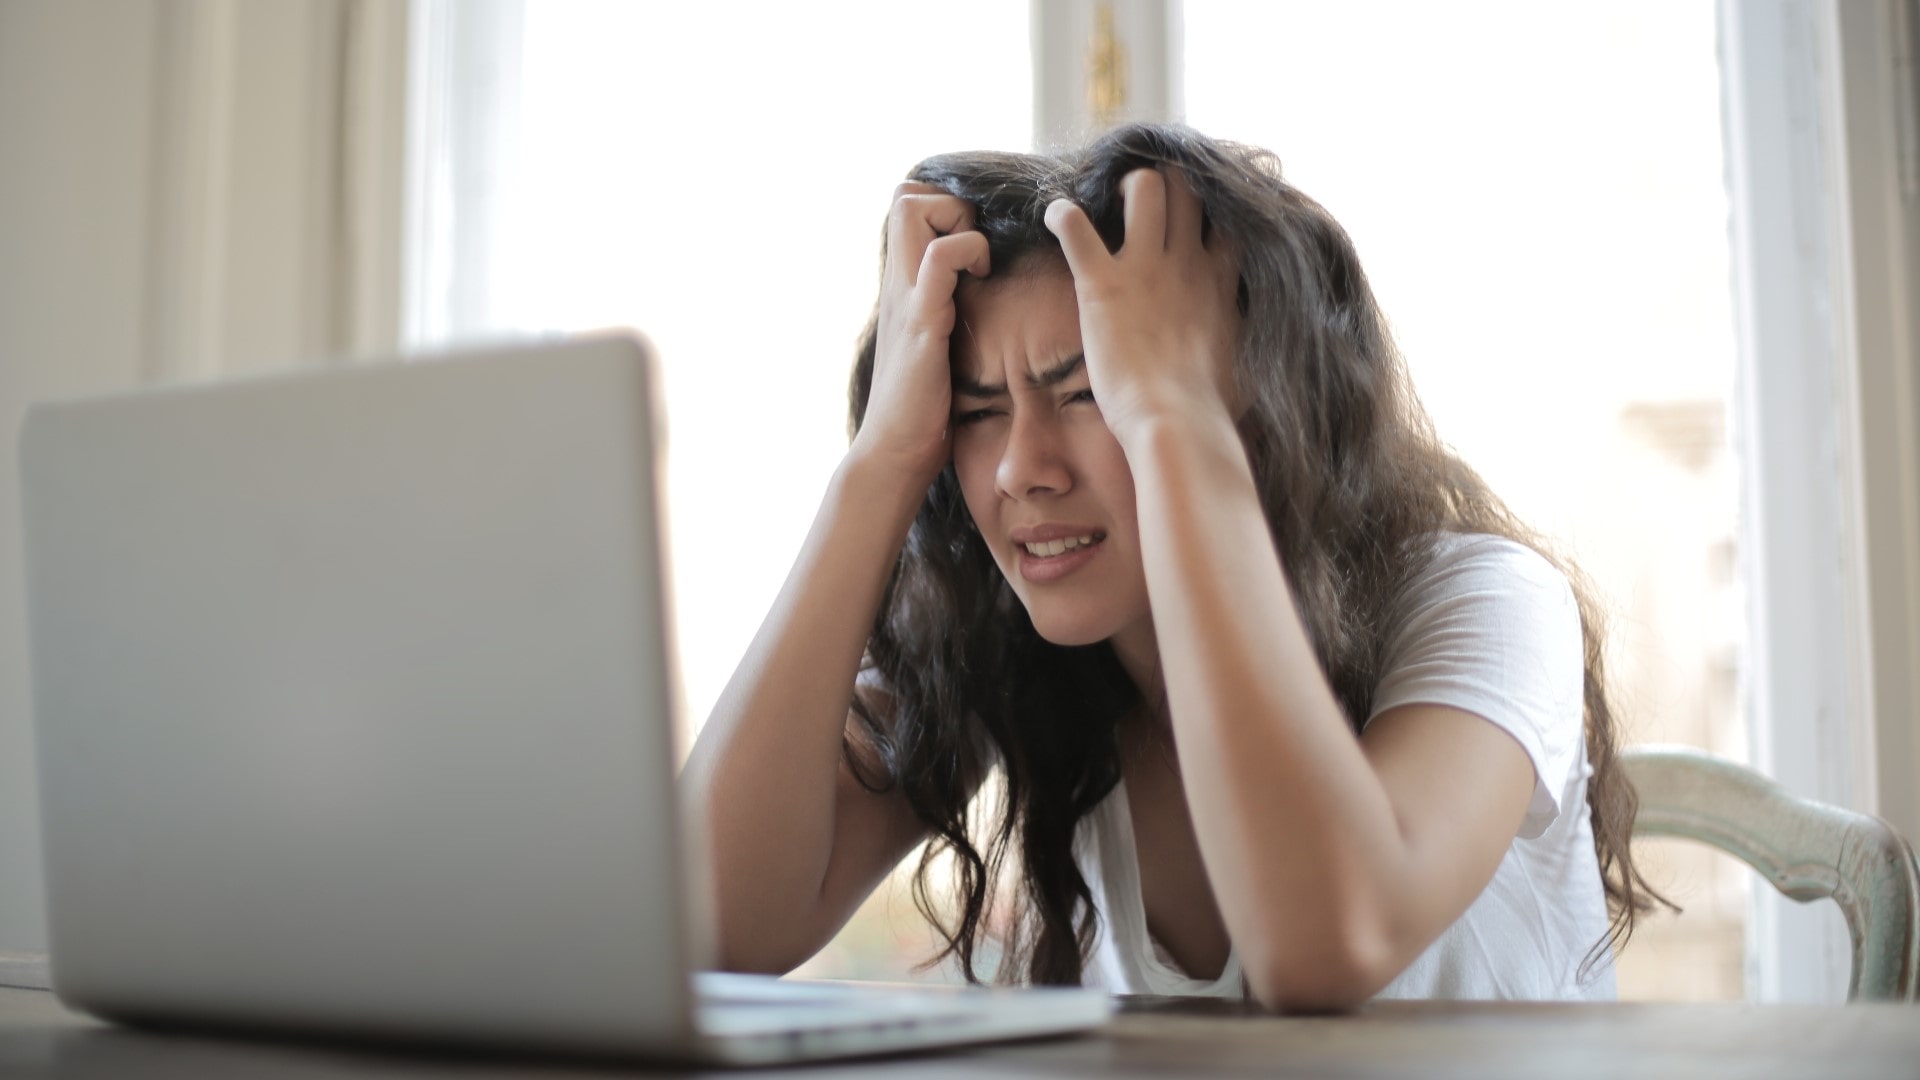 Young woman looking at computer frustrated